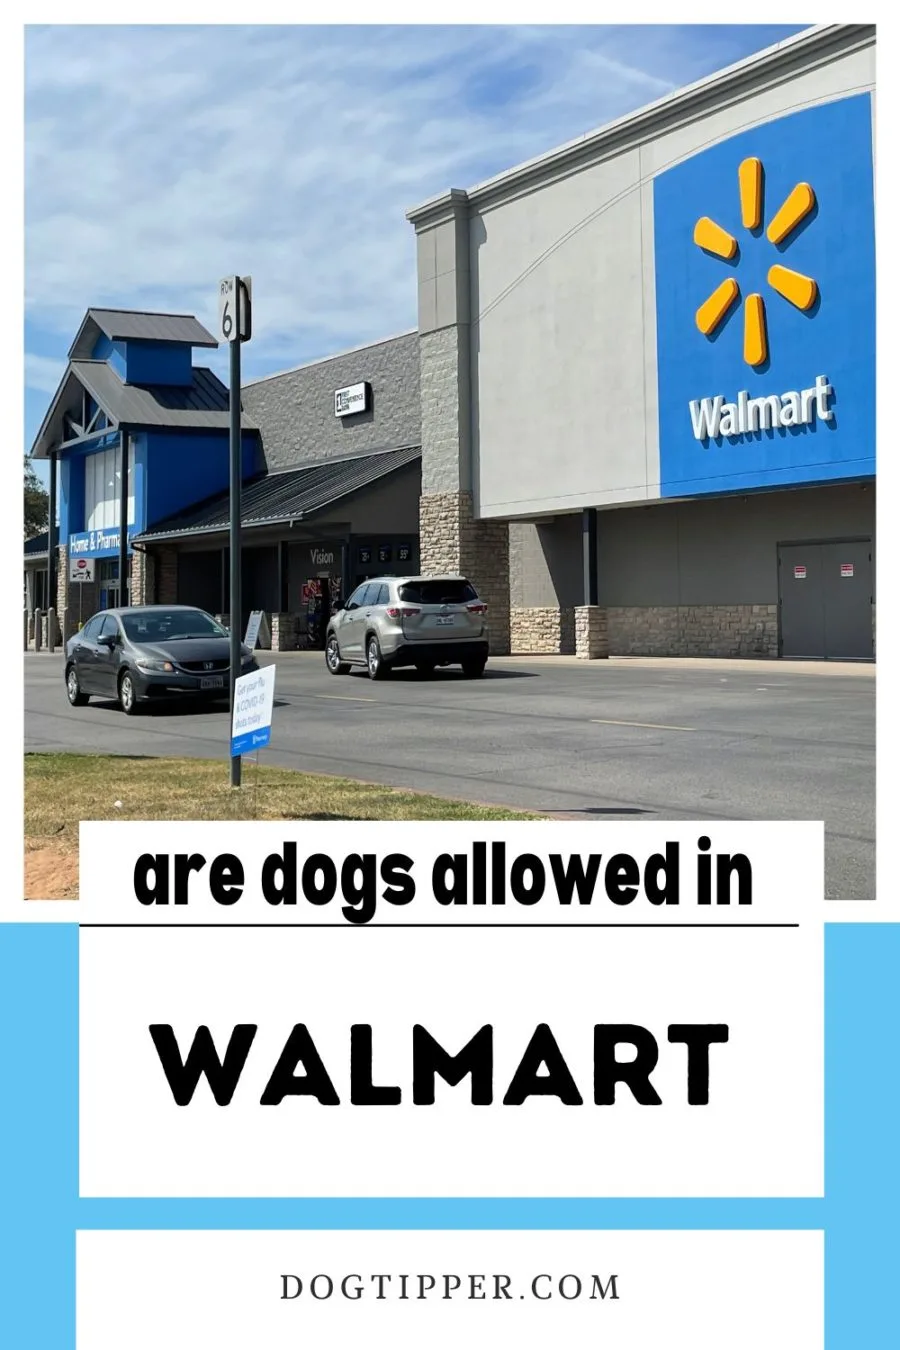 Are dogs allowed in Walmart?